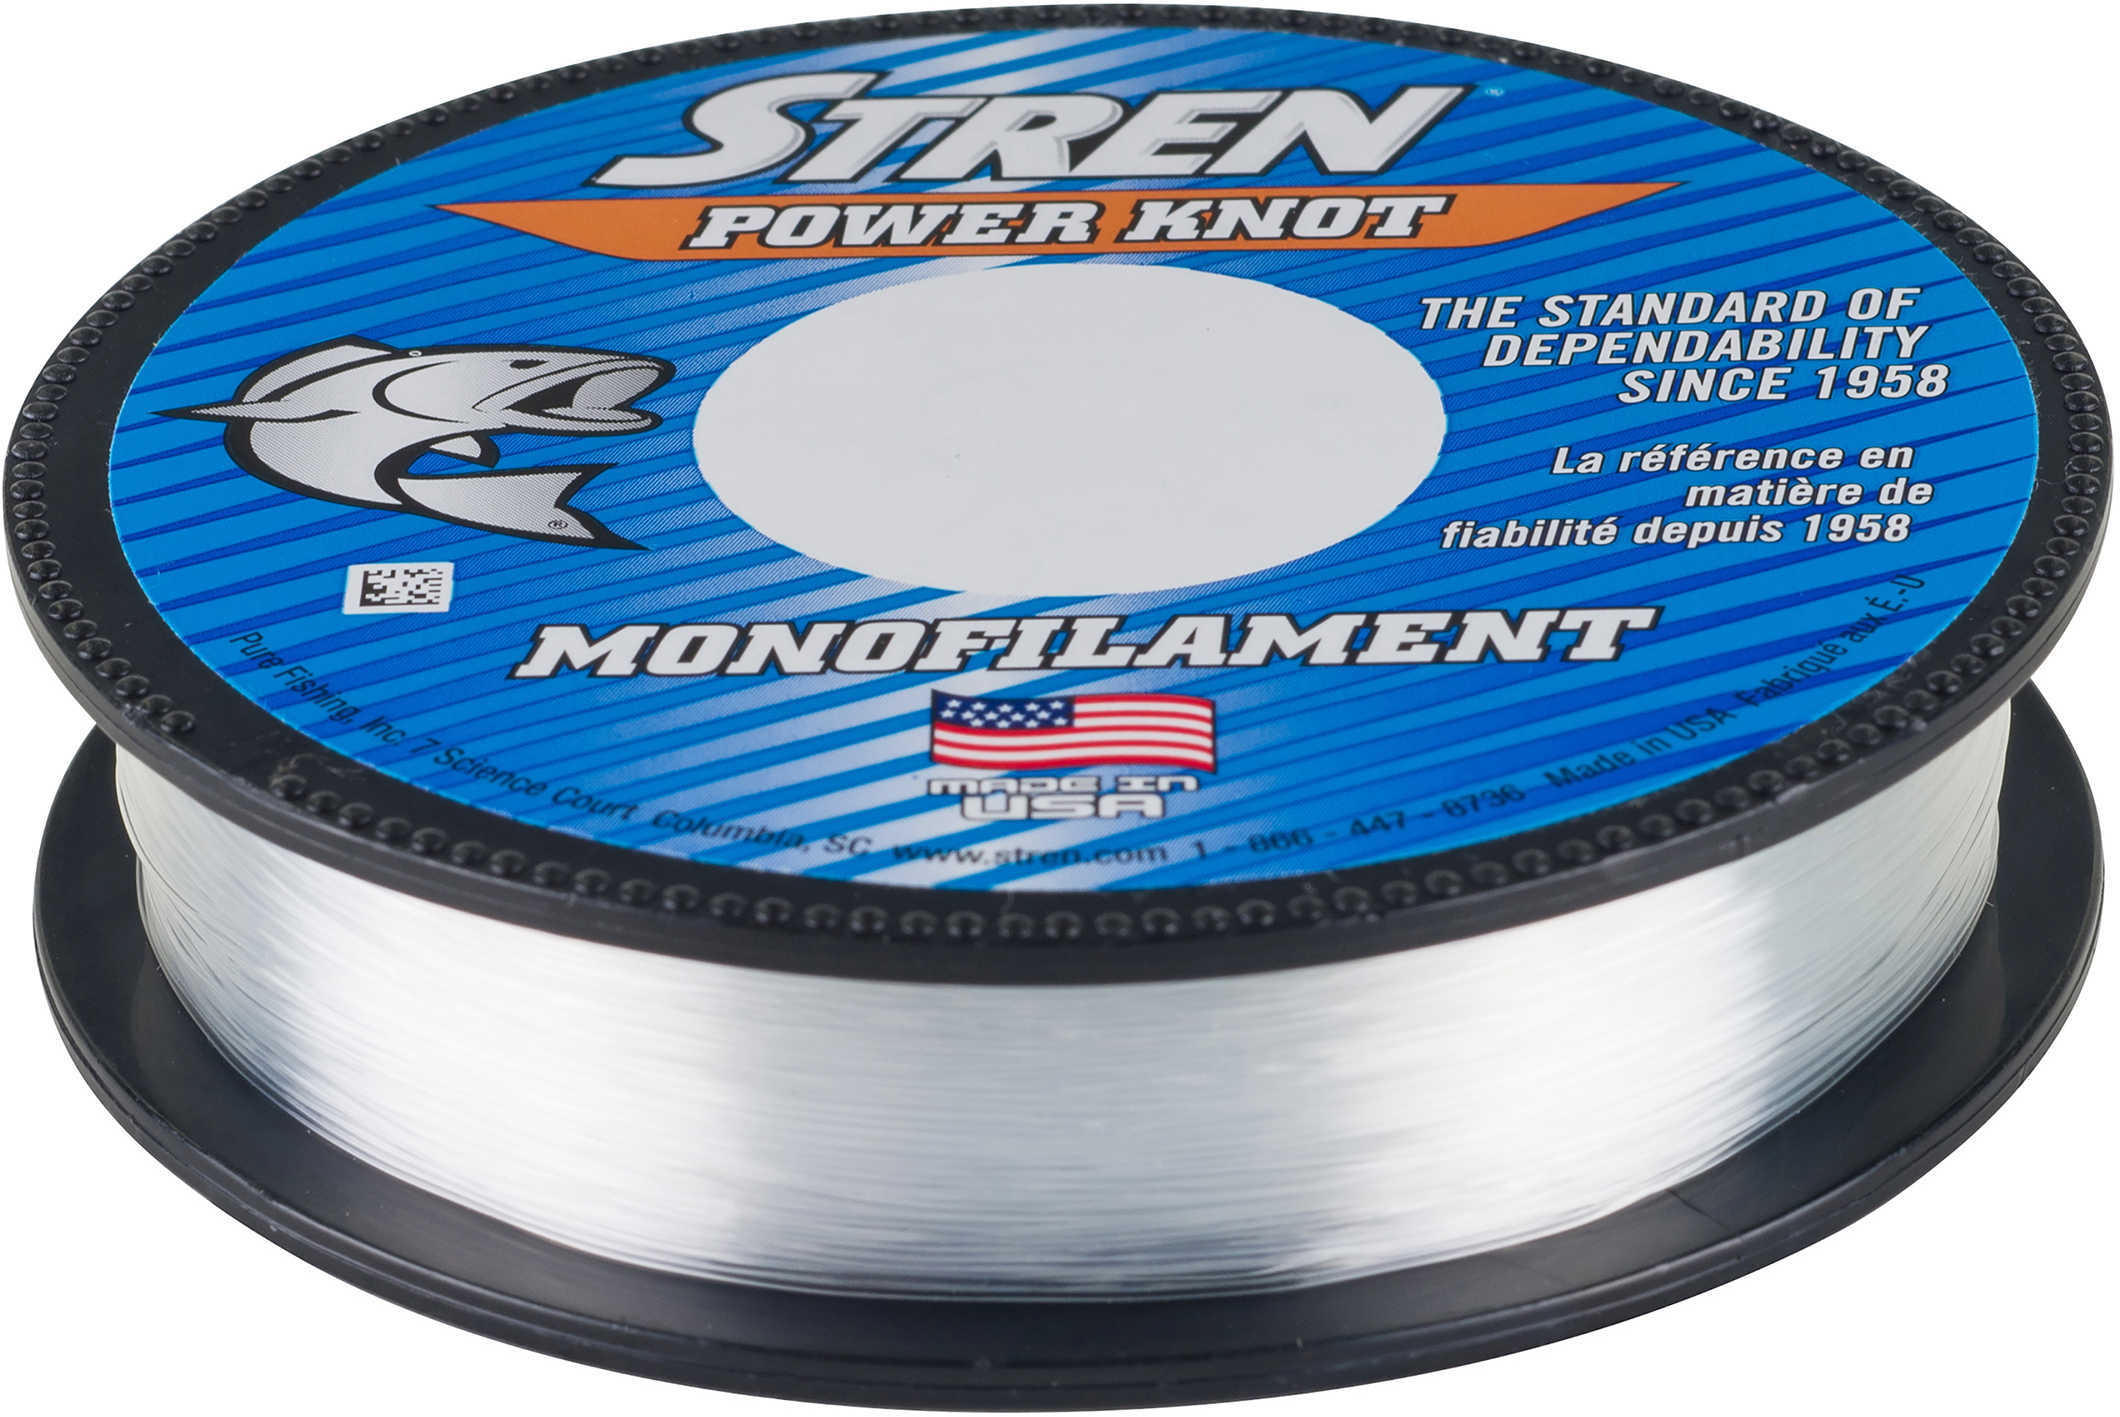 Stren Power Knot 220 Yards , 6 lbs gth, 0.010", Clear Md: 1367551